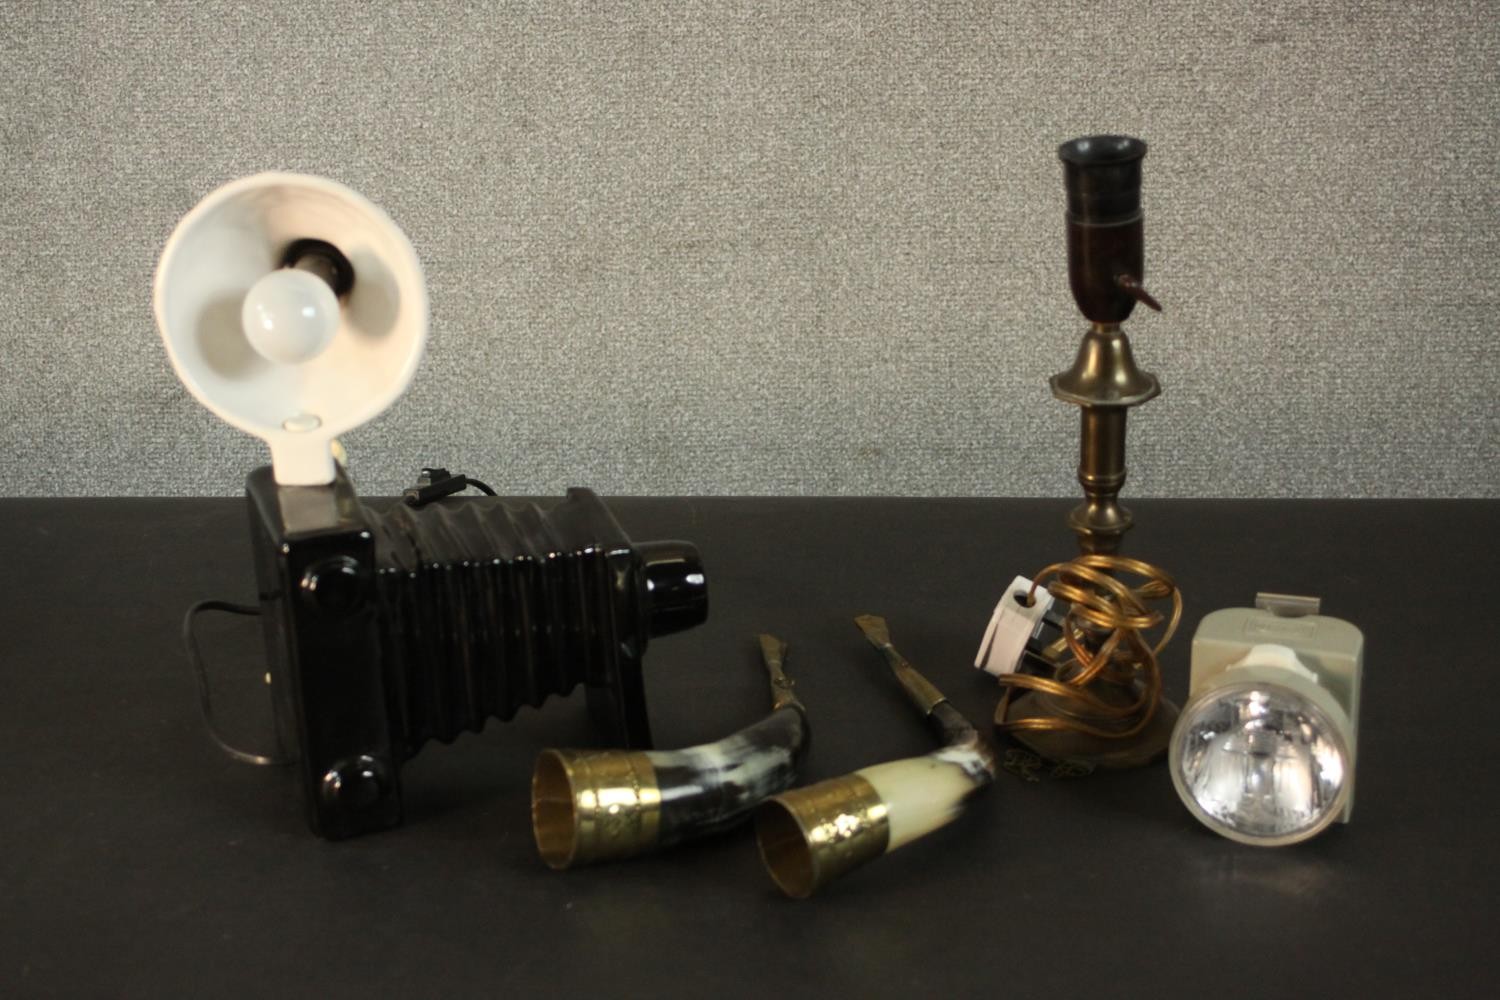 A novelty ceramic table lamp in the form of a vintage camera, along with a brass candle stick